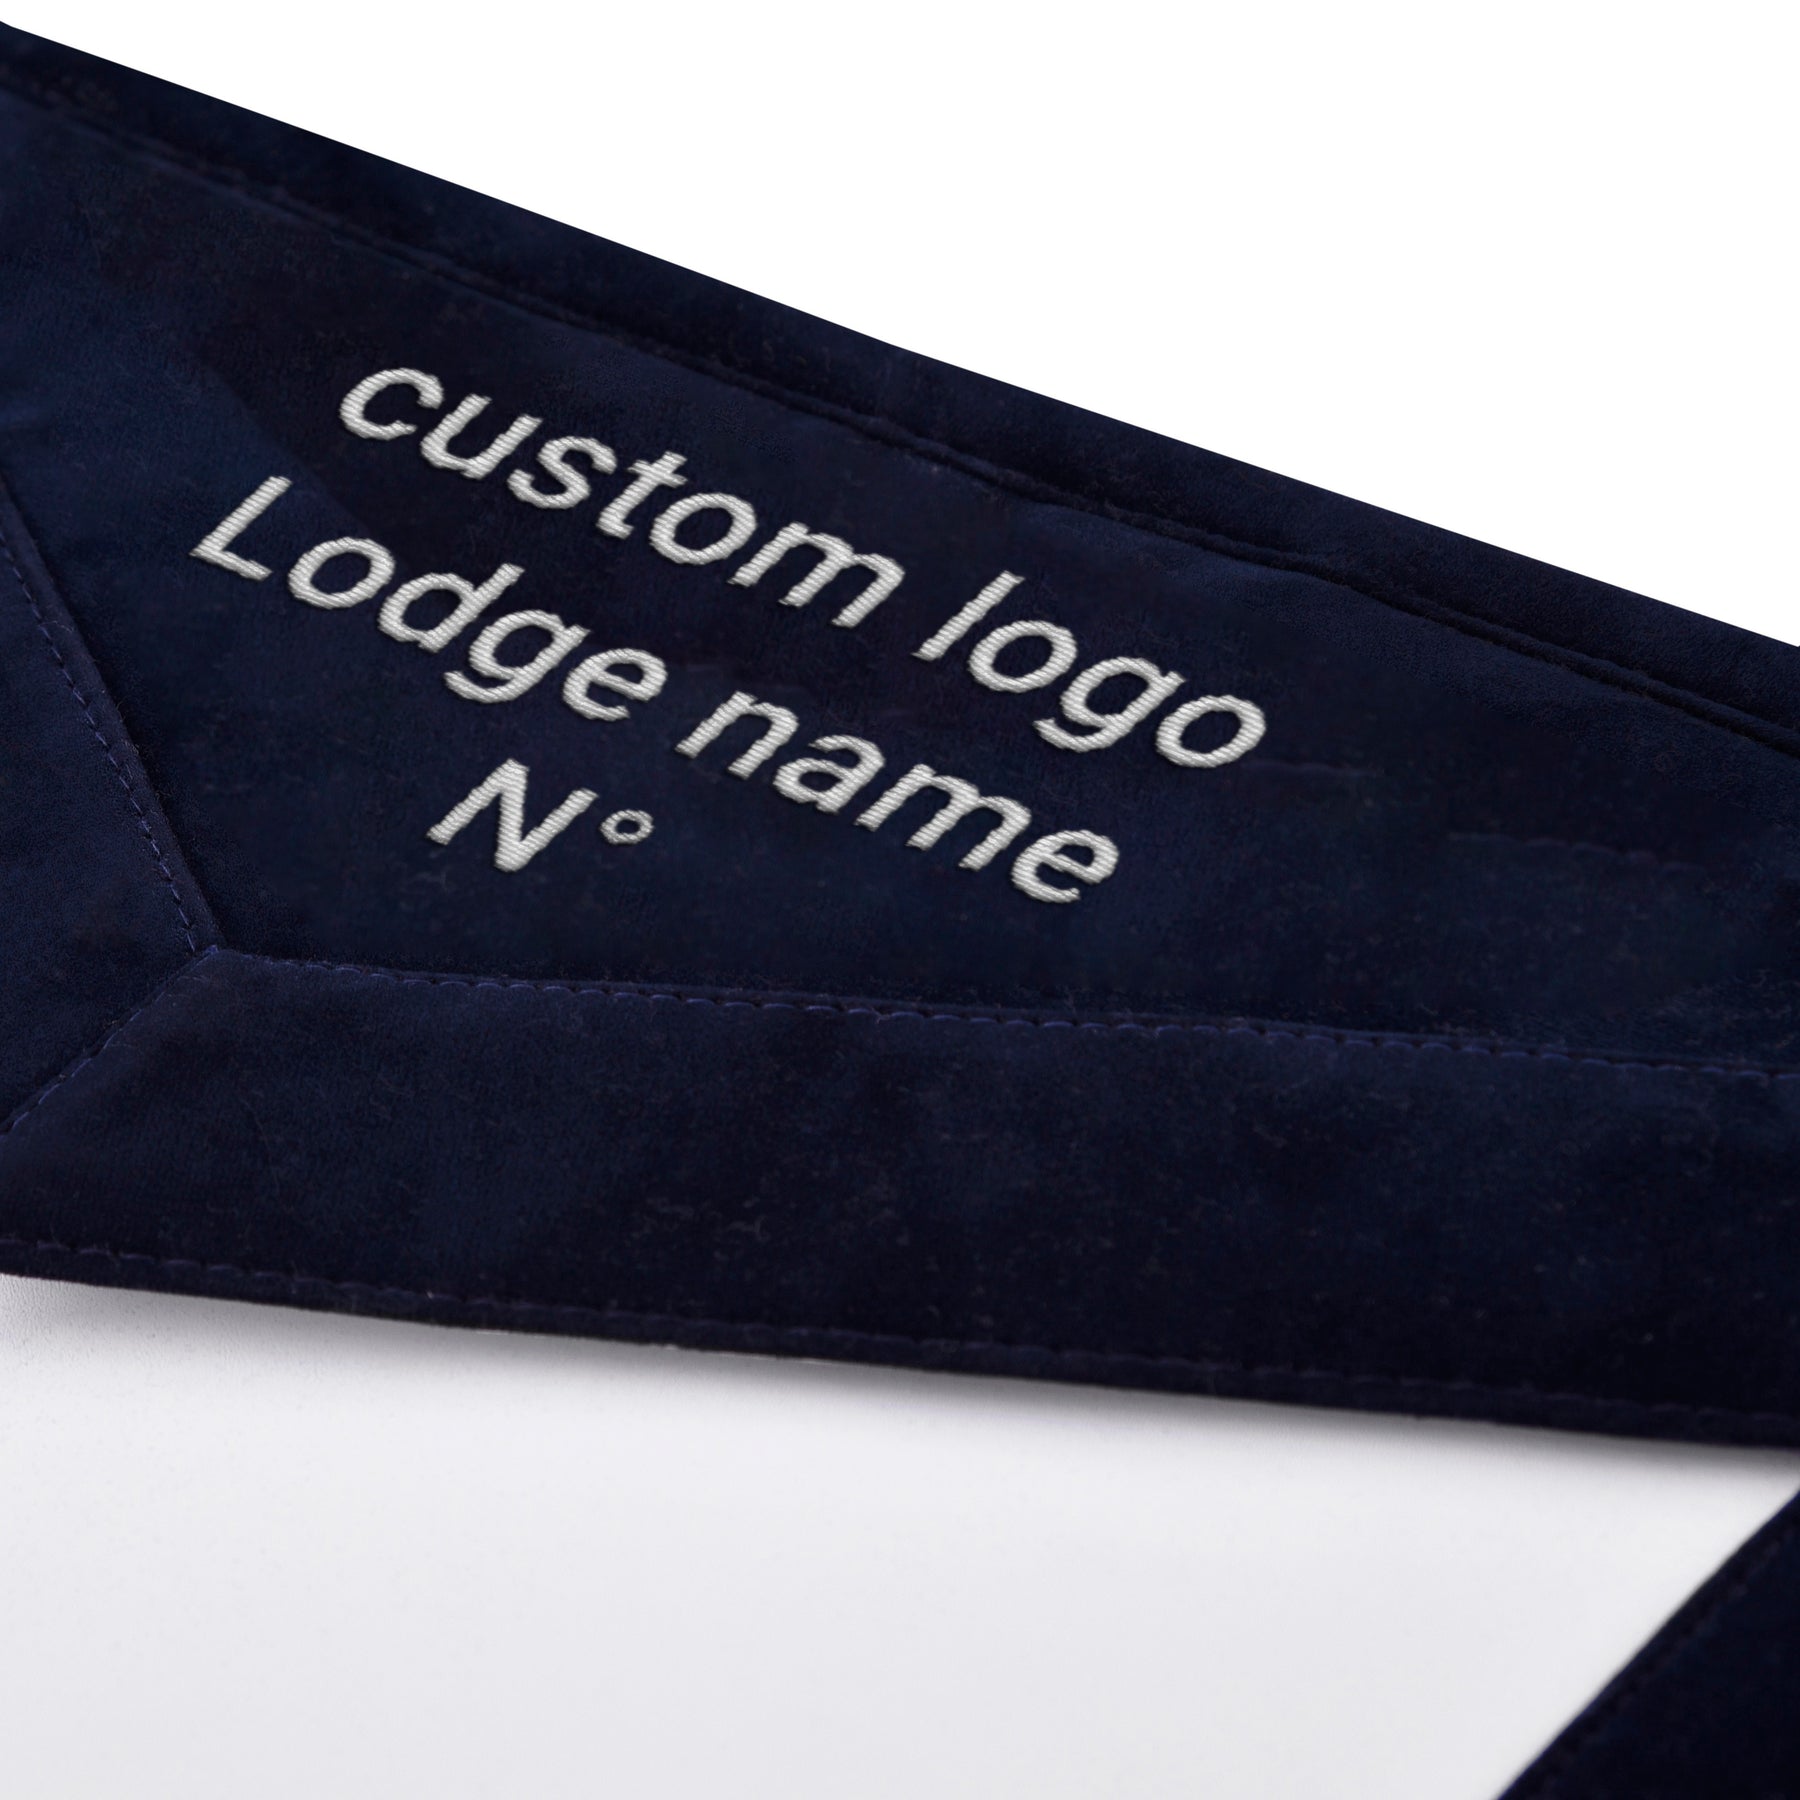 Senior Steward Blue Lodge Officer Apron - Navy Velvet With Silver Embroidery Thread